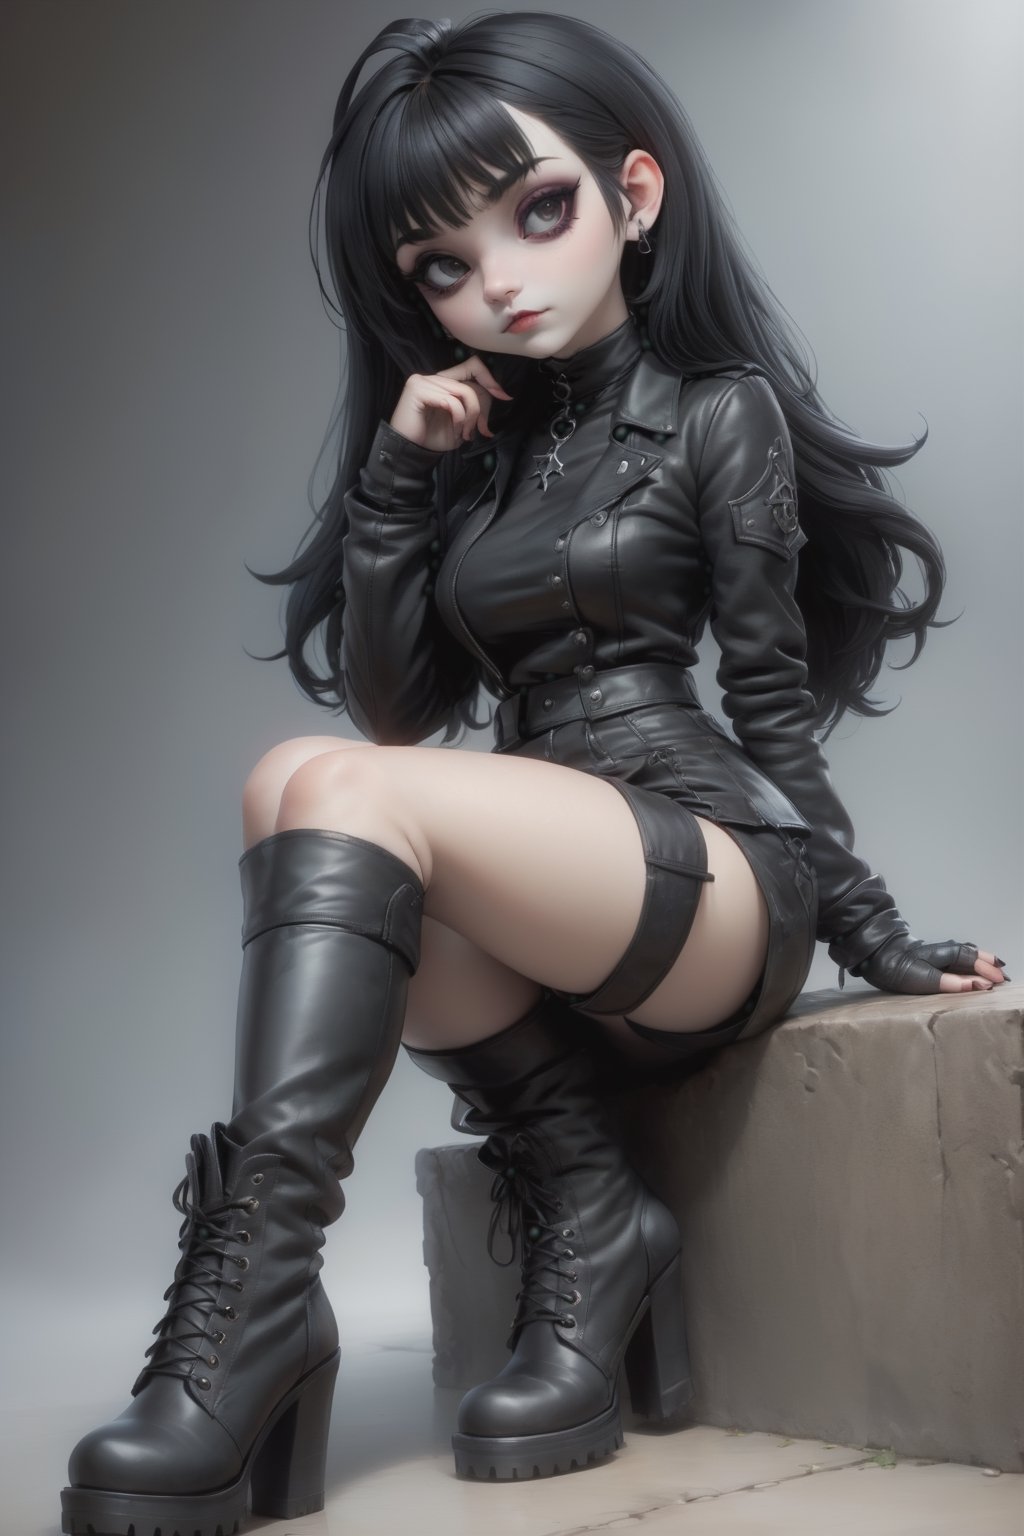 full body pose of a cute goth girl wearing leather. She is sitting down and crossing her legs. She is wearing knee-high leather boots.